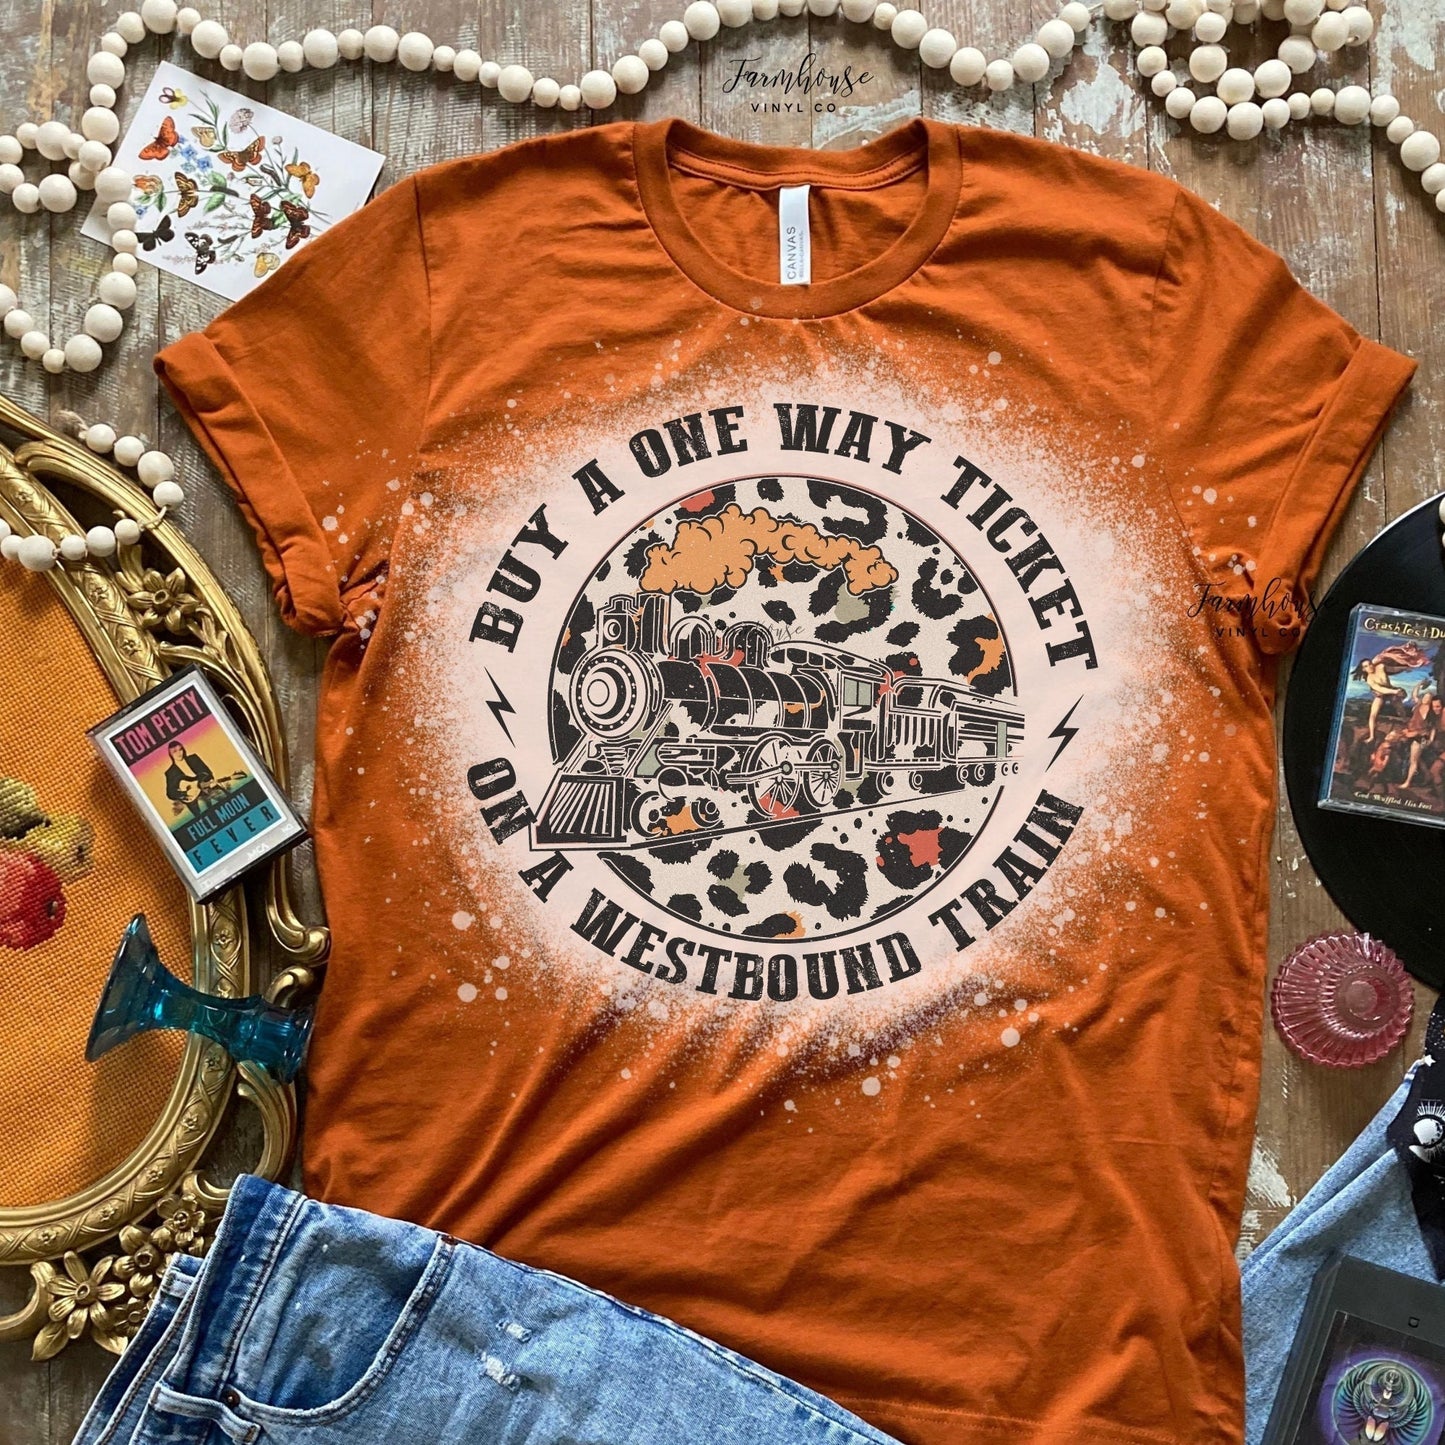 Buy A One Way Ticket on a Westbound Train Bleached Shirt / Trendy shirt / Country Music Fan Shirt / 90s country music song artist / Music T - Farmhouse Vinyl Co